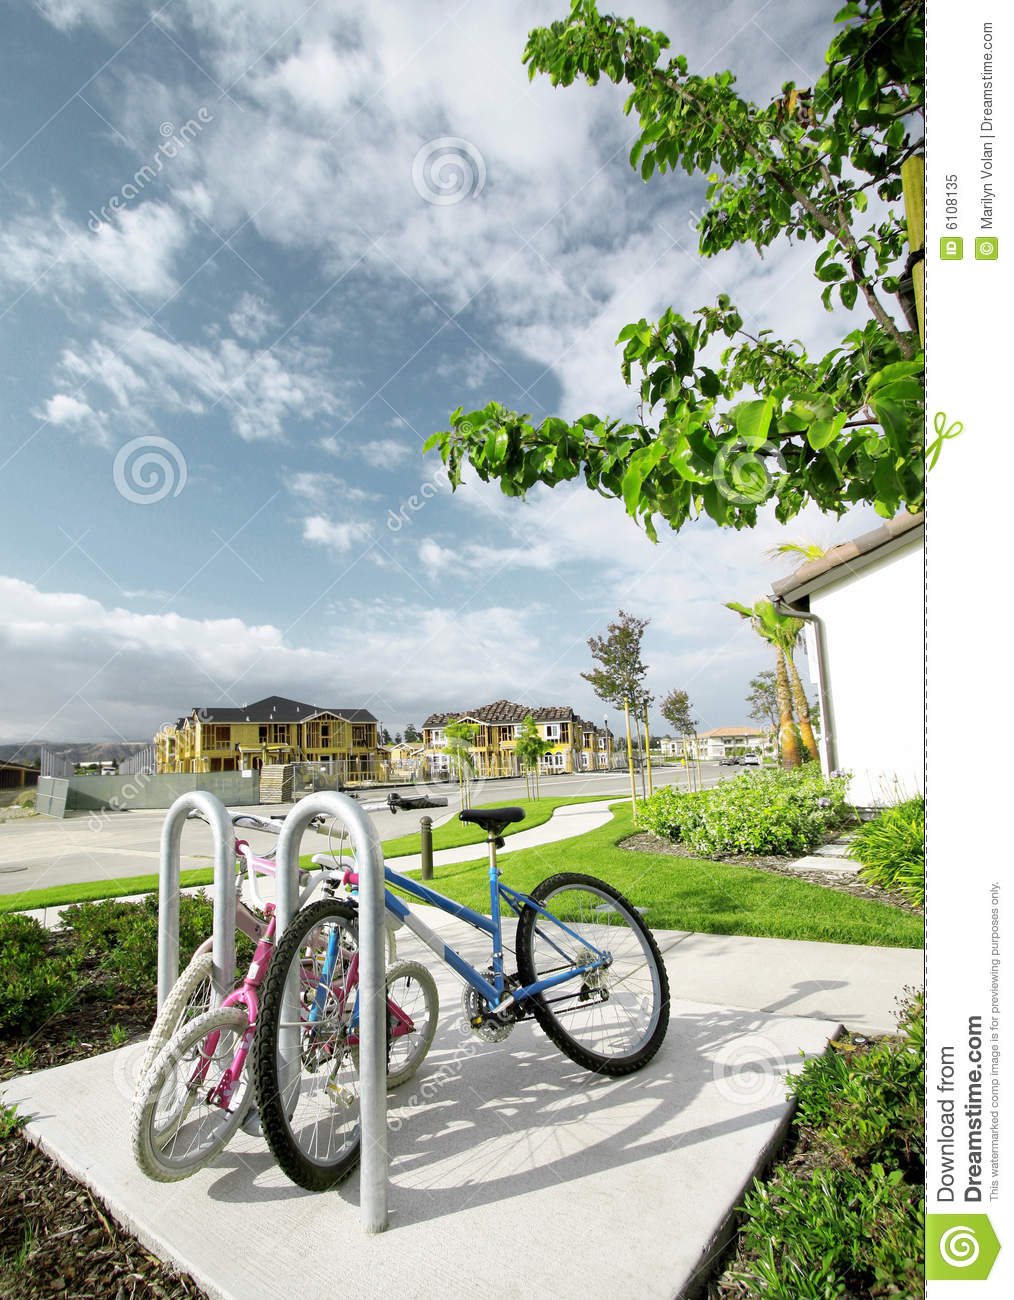 Parked Bicycles On The Sidewalk In A Modern Neighborhood Housing    